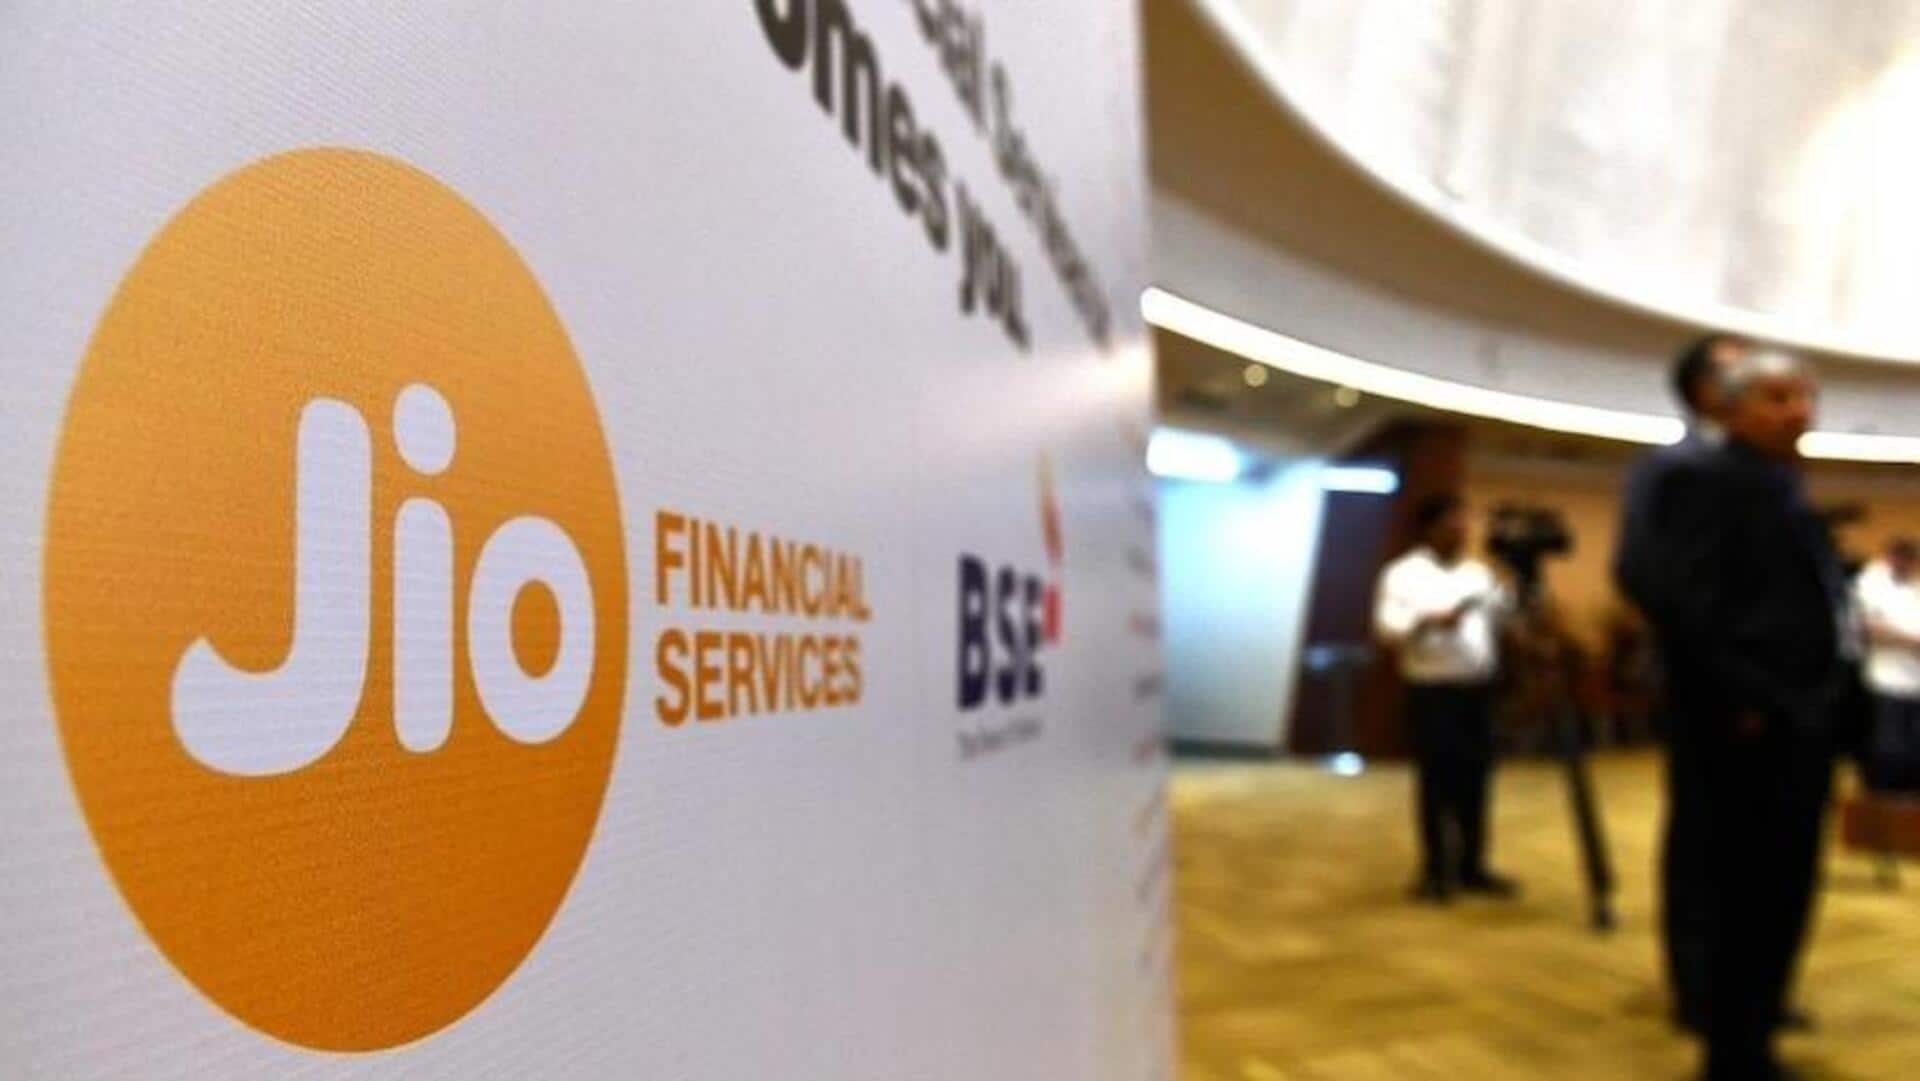 Jio Financial Services extends 5-day rally as Nifty expulsion looms